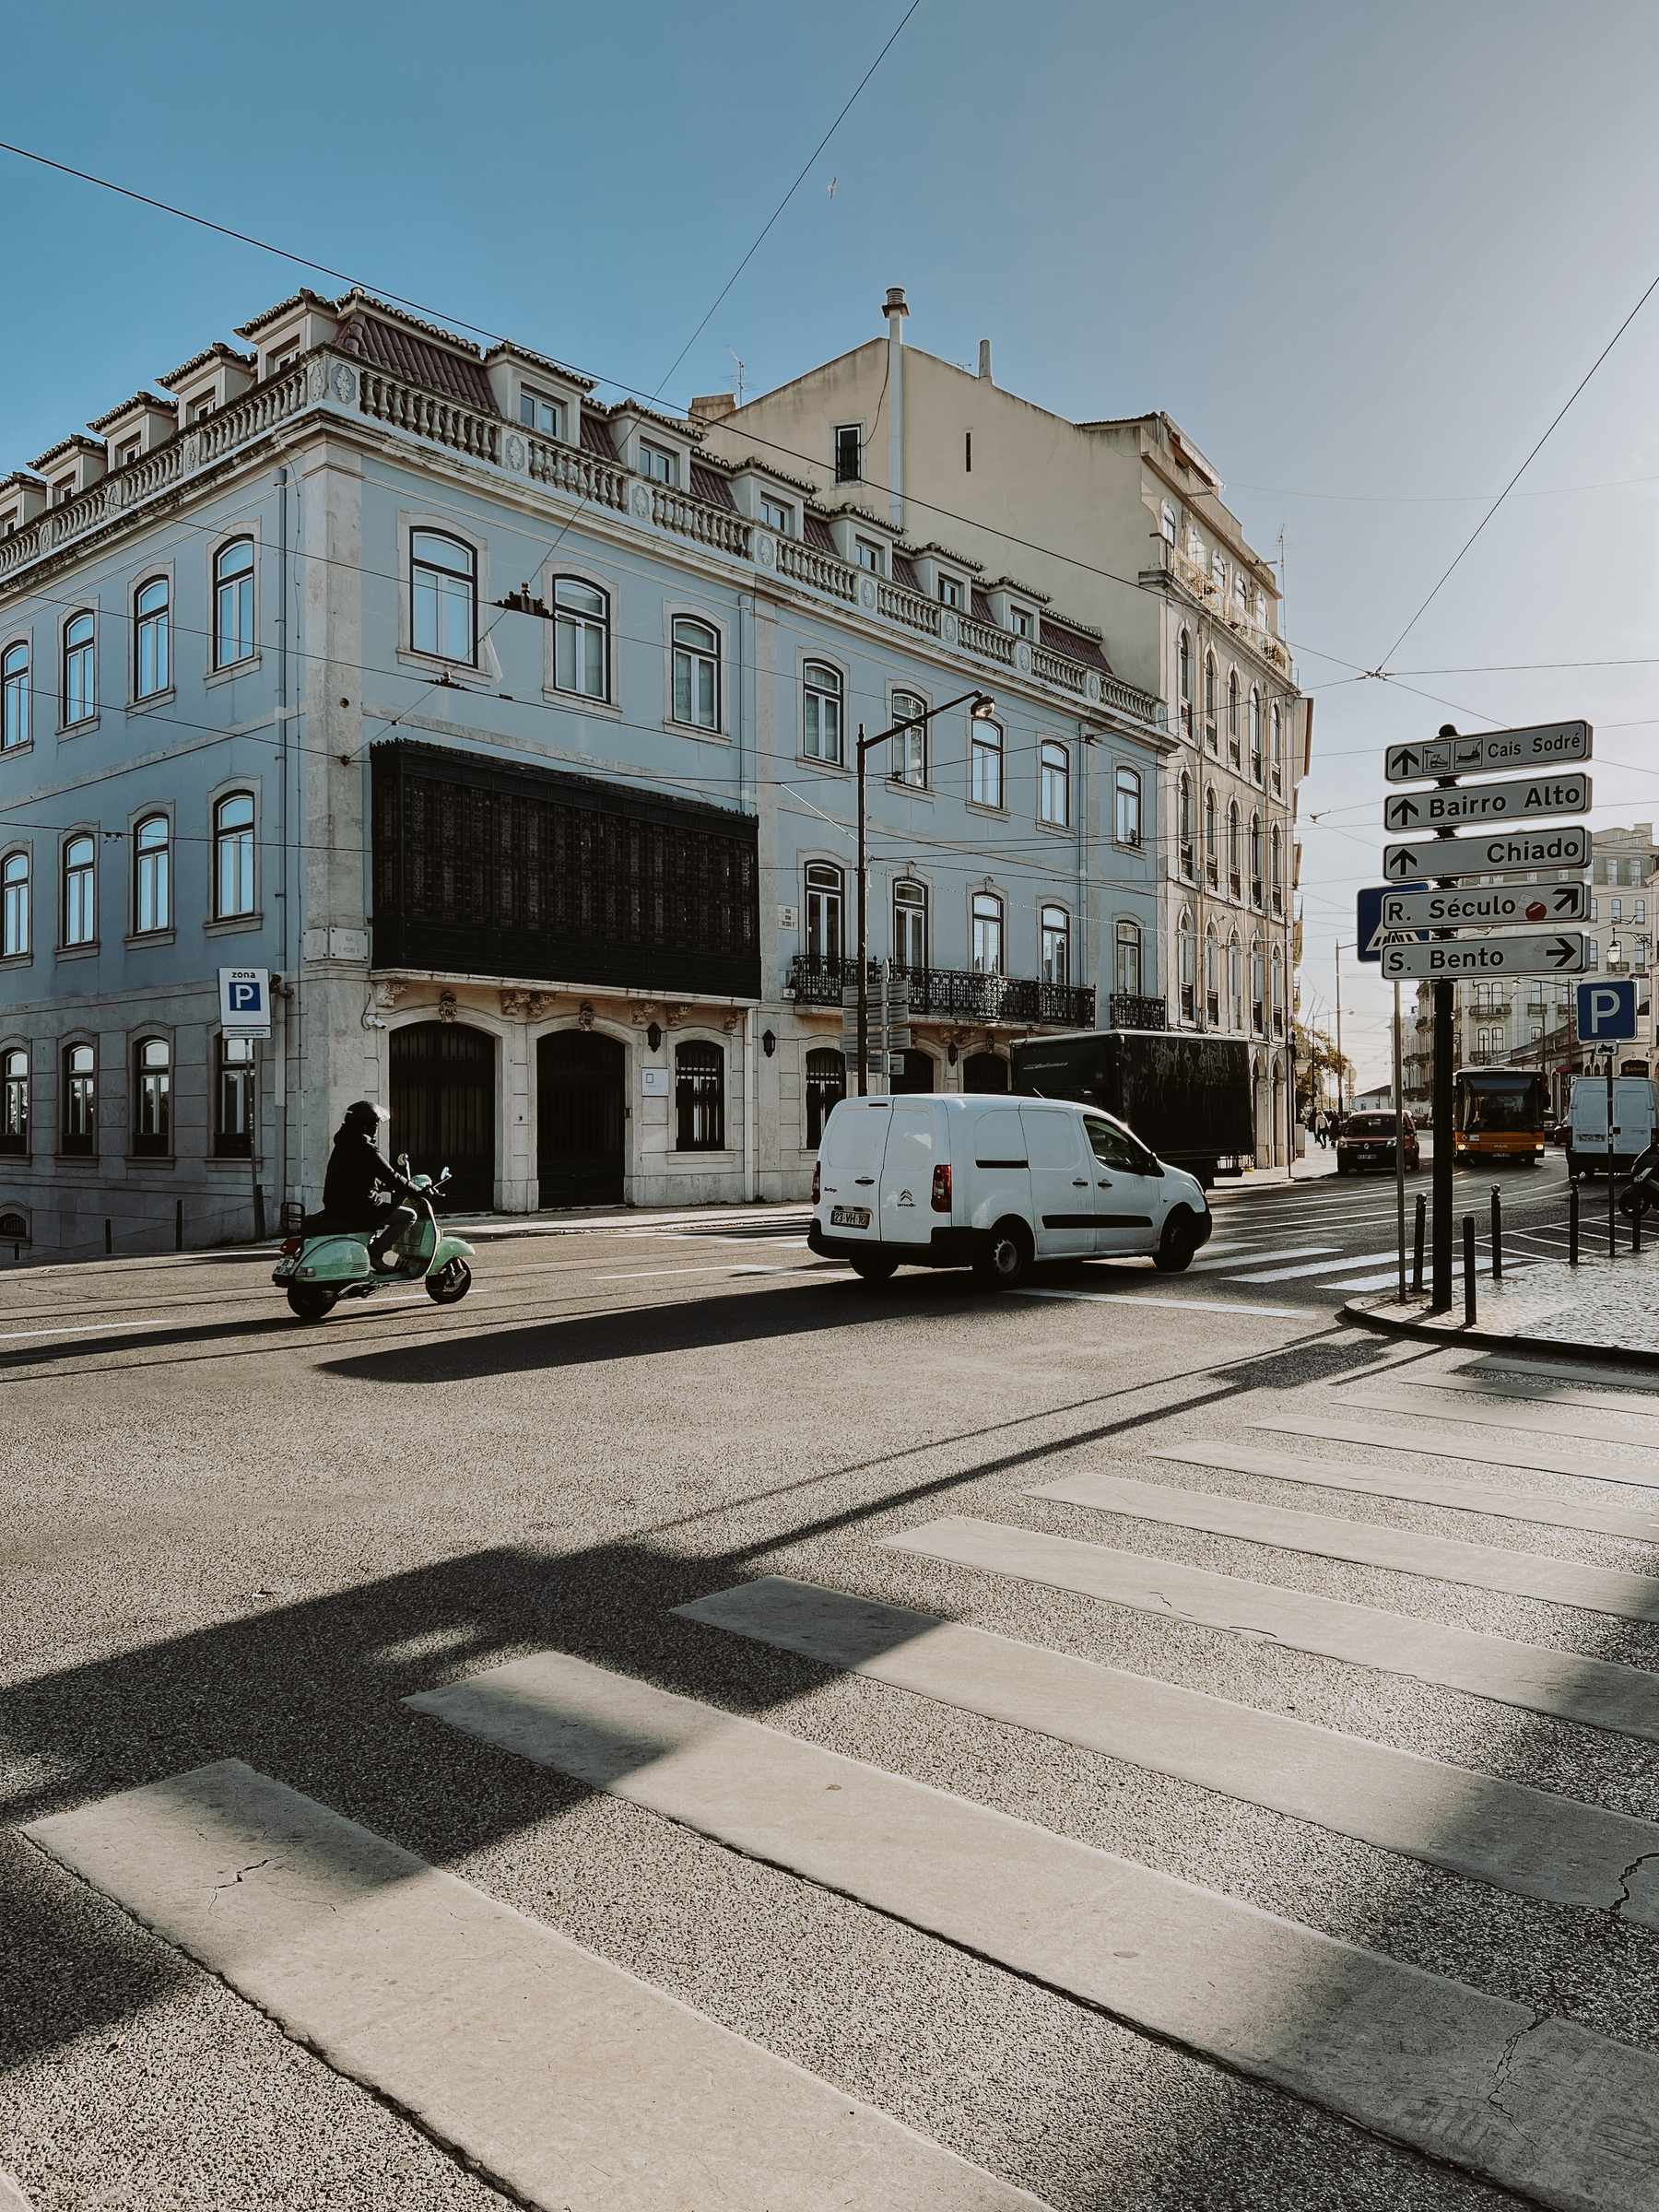 A sunny street scene with traditional European architecture, a pedestrian crossing, a scooter, a white van, and street signs.